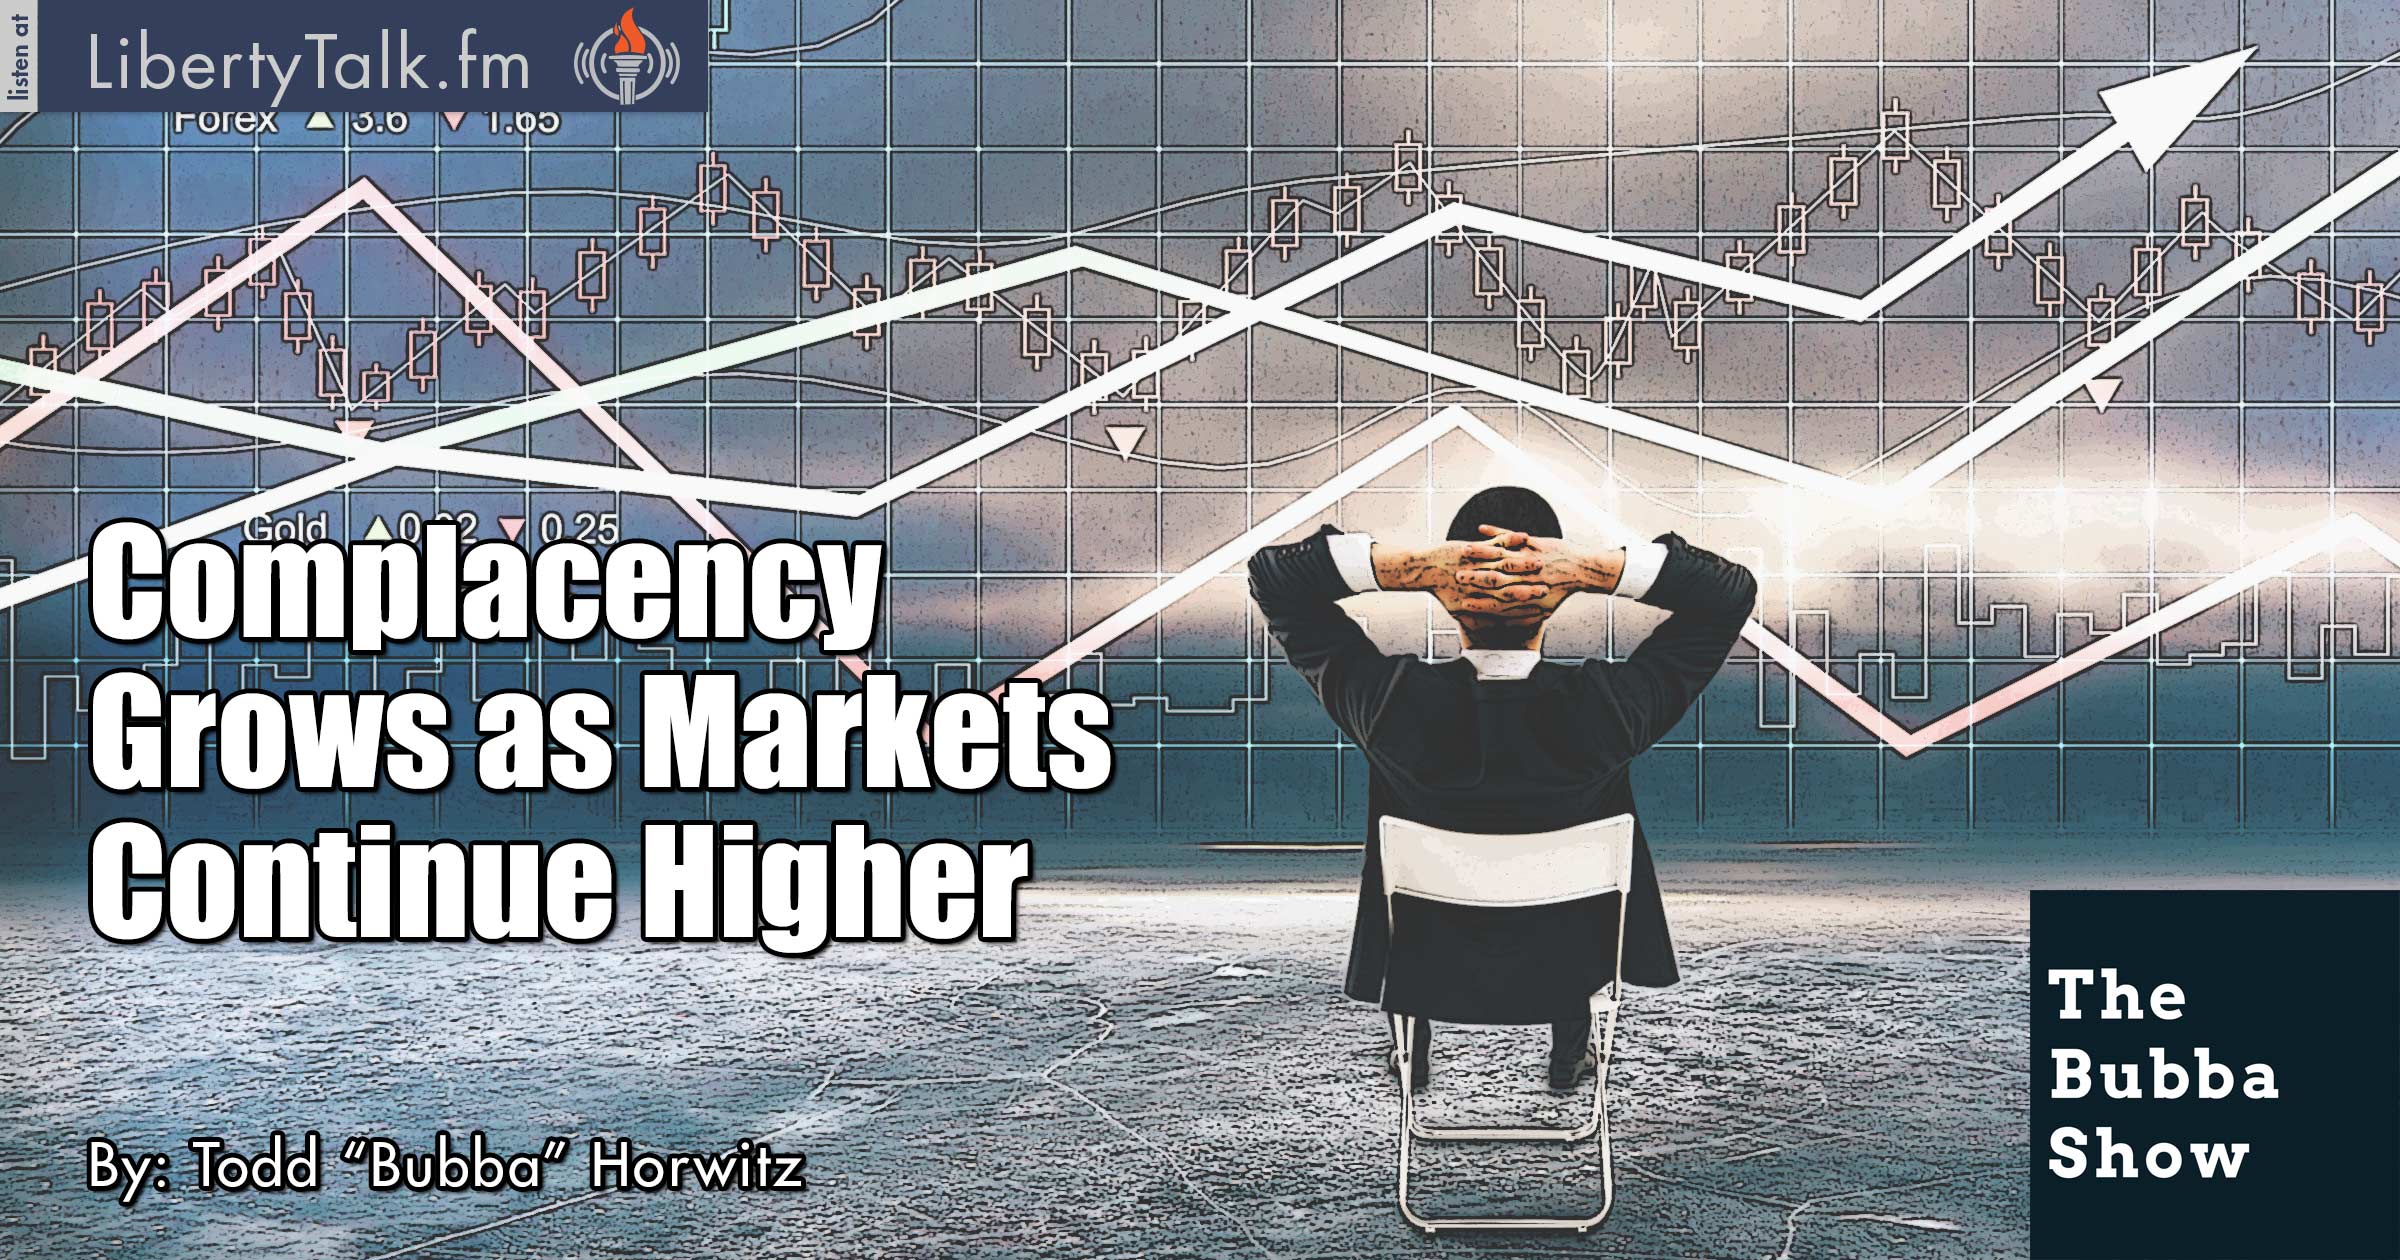 Complacency Grows as Markets Continue Higher - The Bubba Show